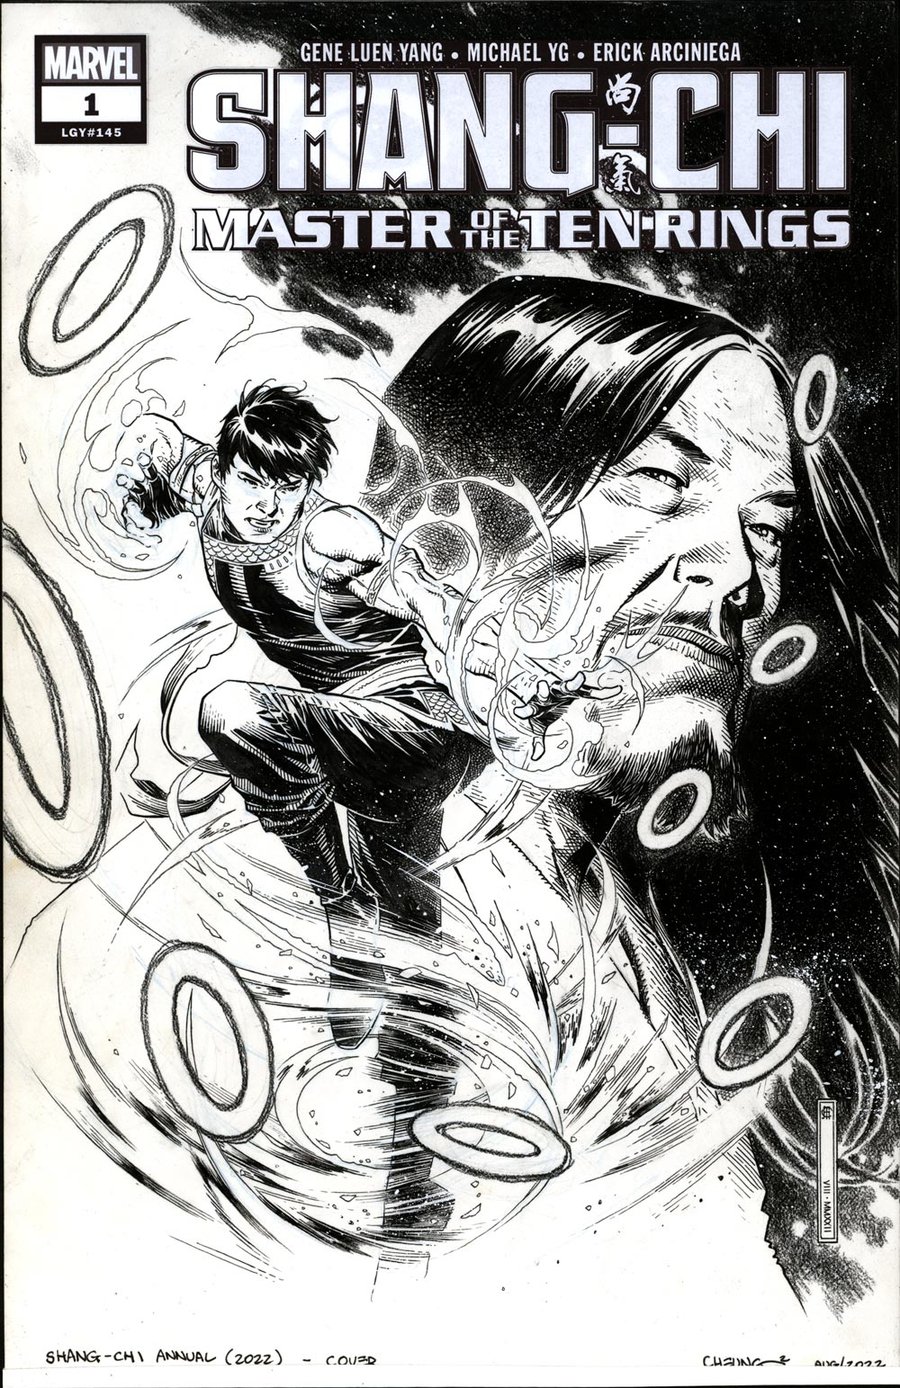 Image of SHANG-CHI, MASTER OF THE TEN RINGS ANNUAL #1 Cover